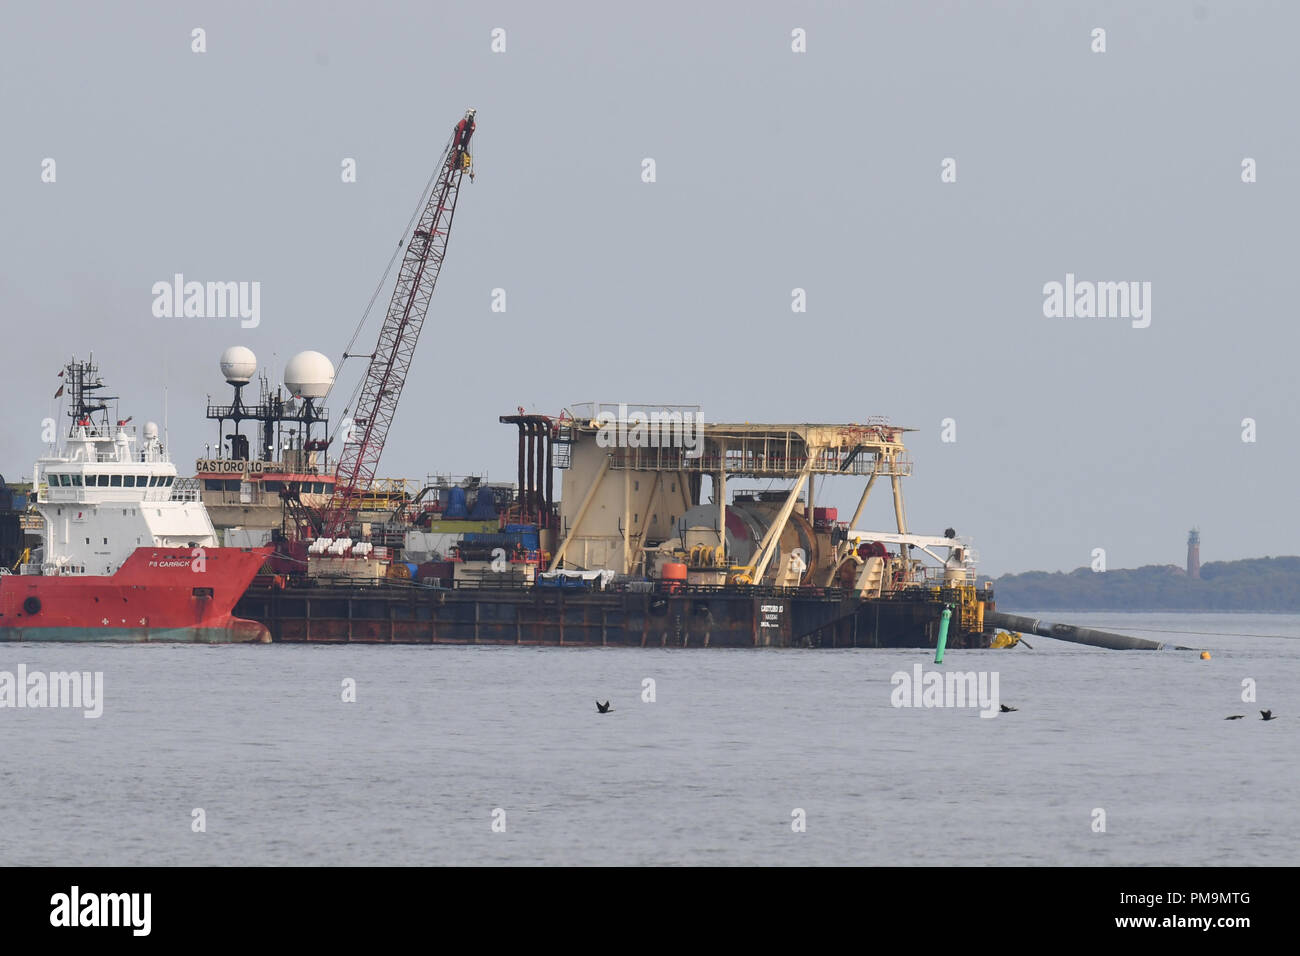 17 September 2018, Mecklenburg-Western Pomerania, Thiessow: The pipeline laying vessel 'Castoro 10' (r) is laying pipes for the Baltic Sea natural gas pipeline Nord Stream 2 between the island of Rügen and the island of Greifswalder Oie. The 1,200-kilometer gas pipeline will transport around 55 billion cubic meters of Russian natural gas from Russia to Germany every year from the end of 2019. Photo: Stefan Sauer/dpa-Zentralbild/dpa Stock Photo